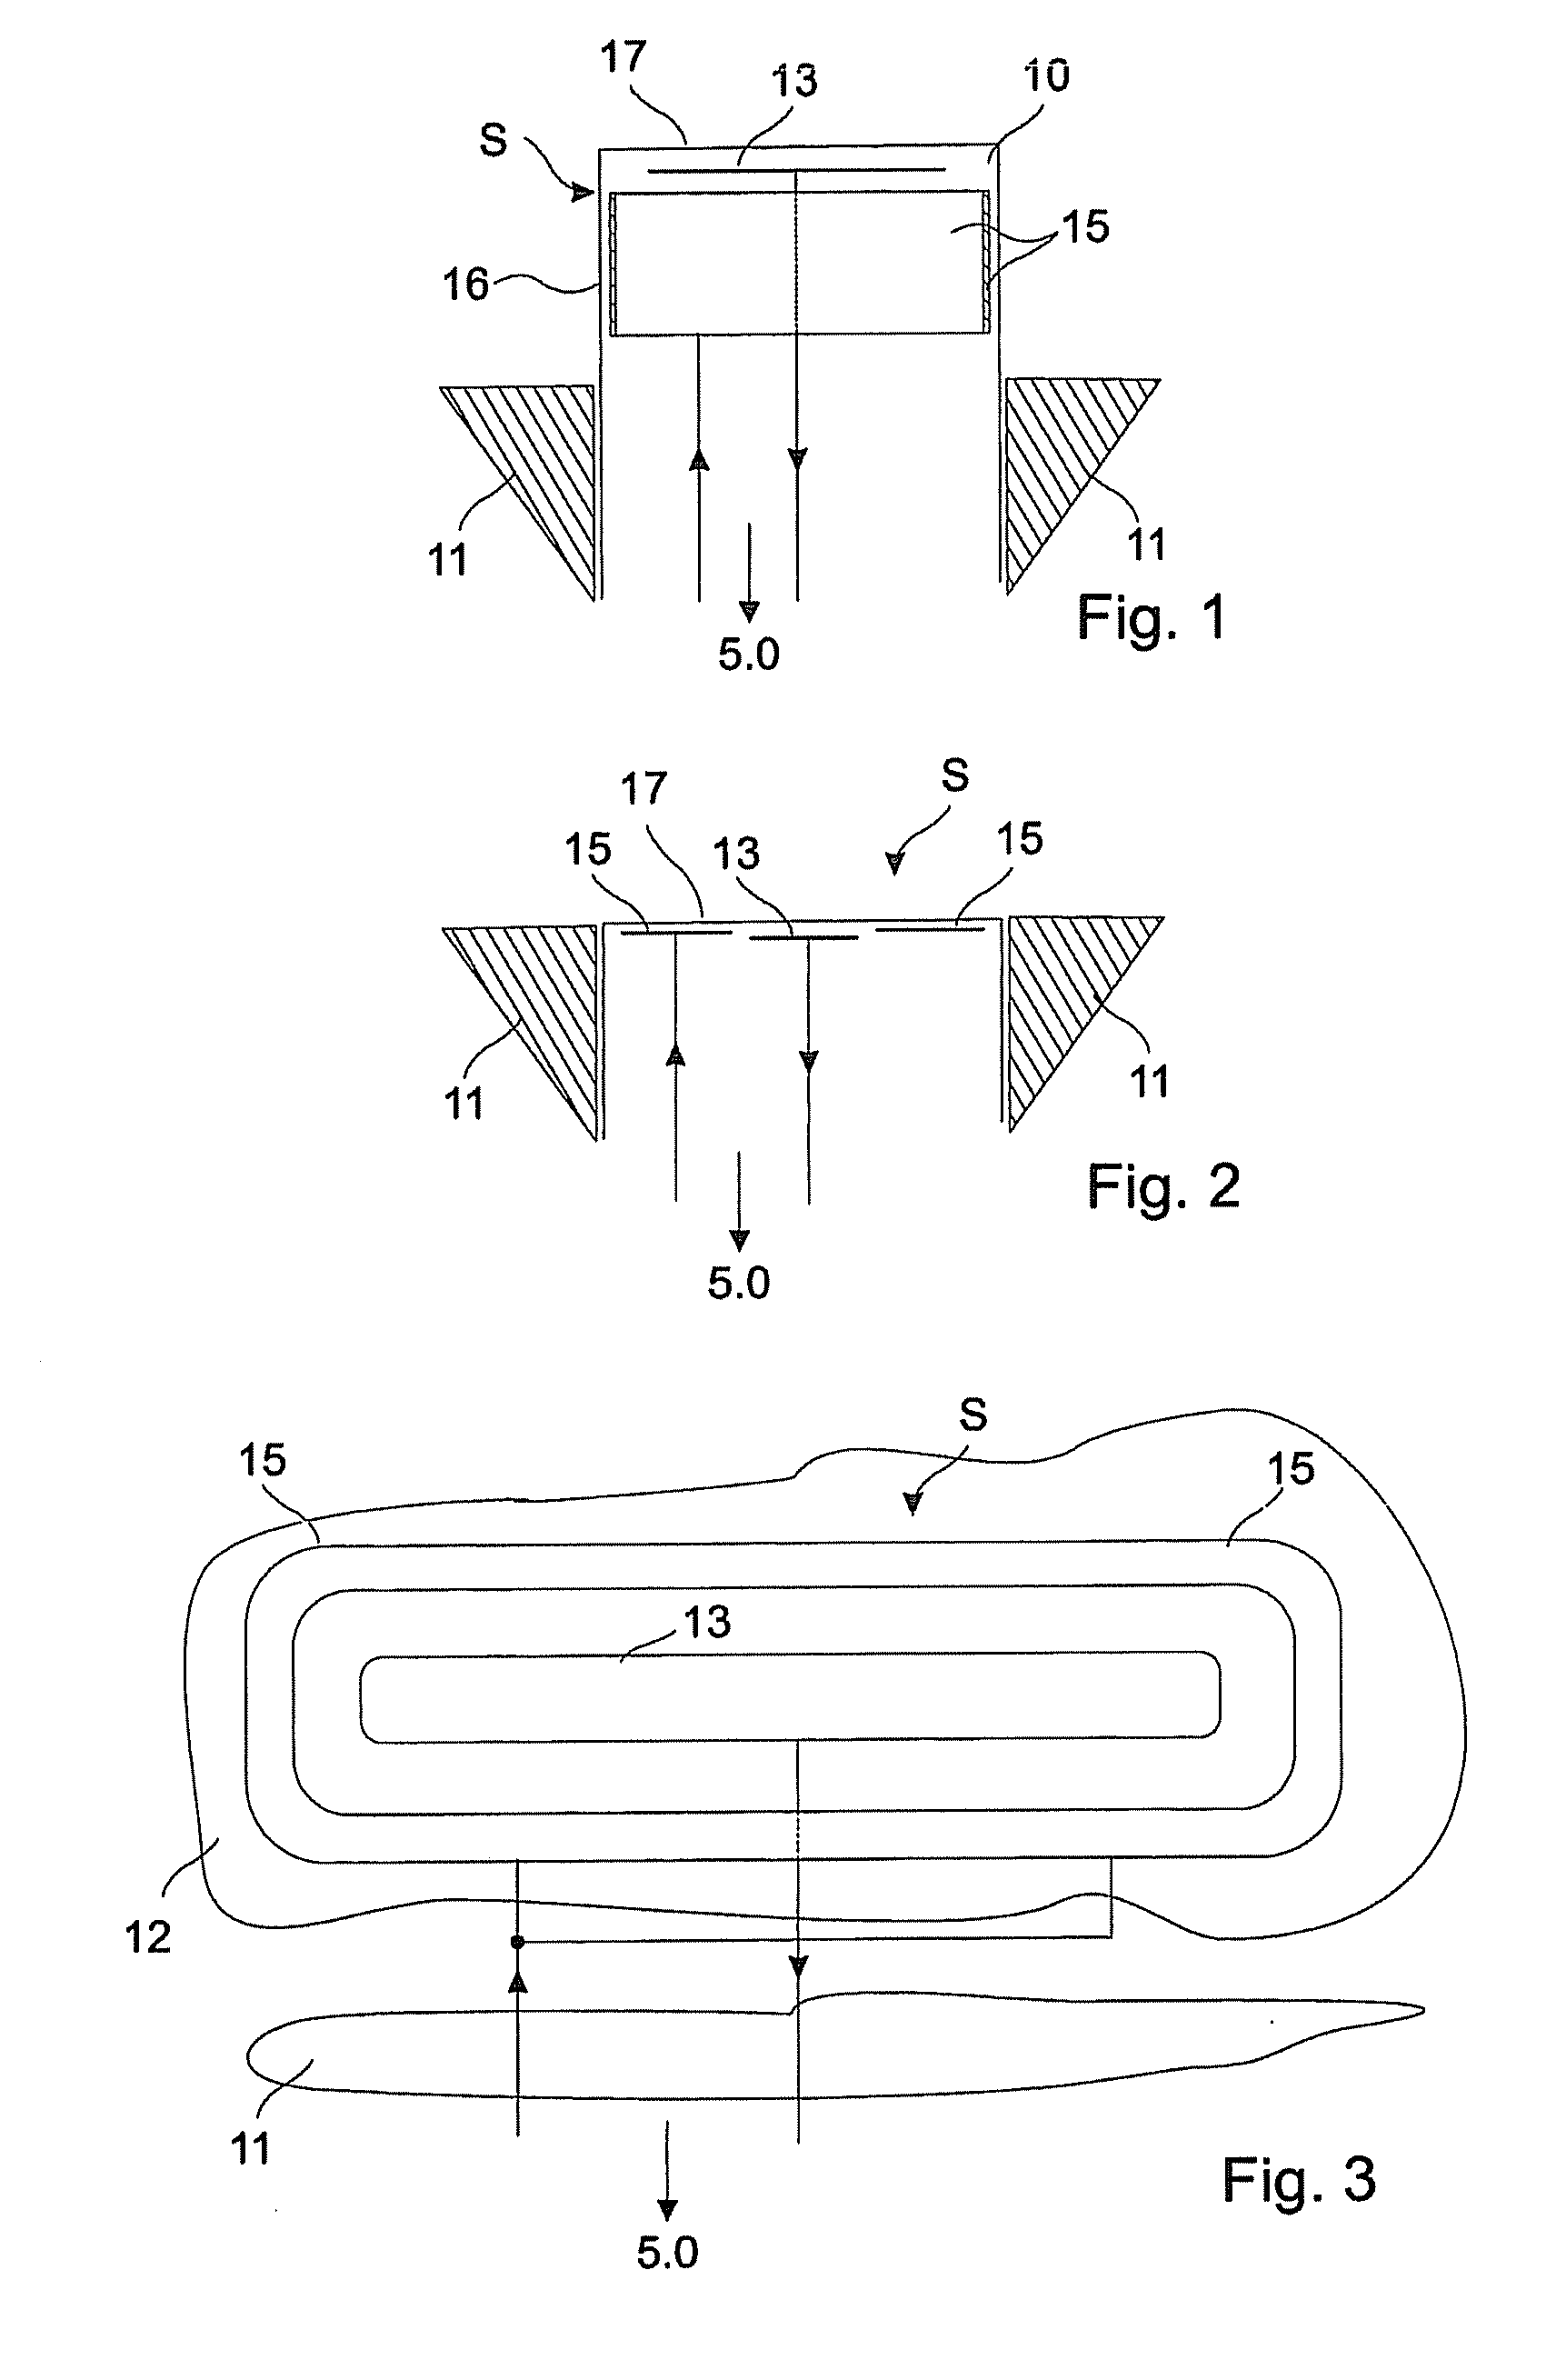 Apparatus for capacitively measuring changes